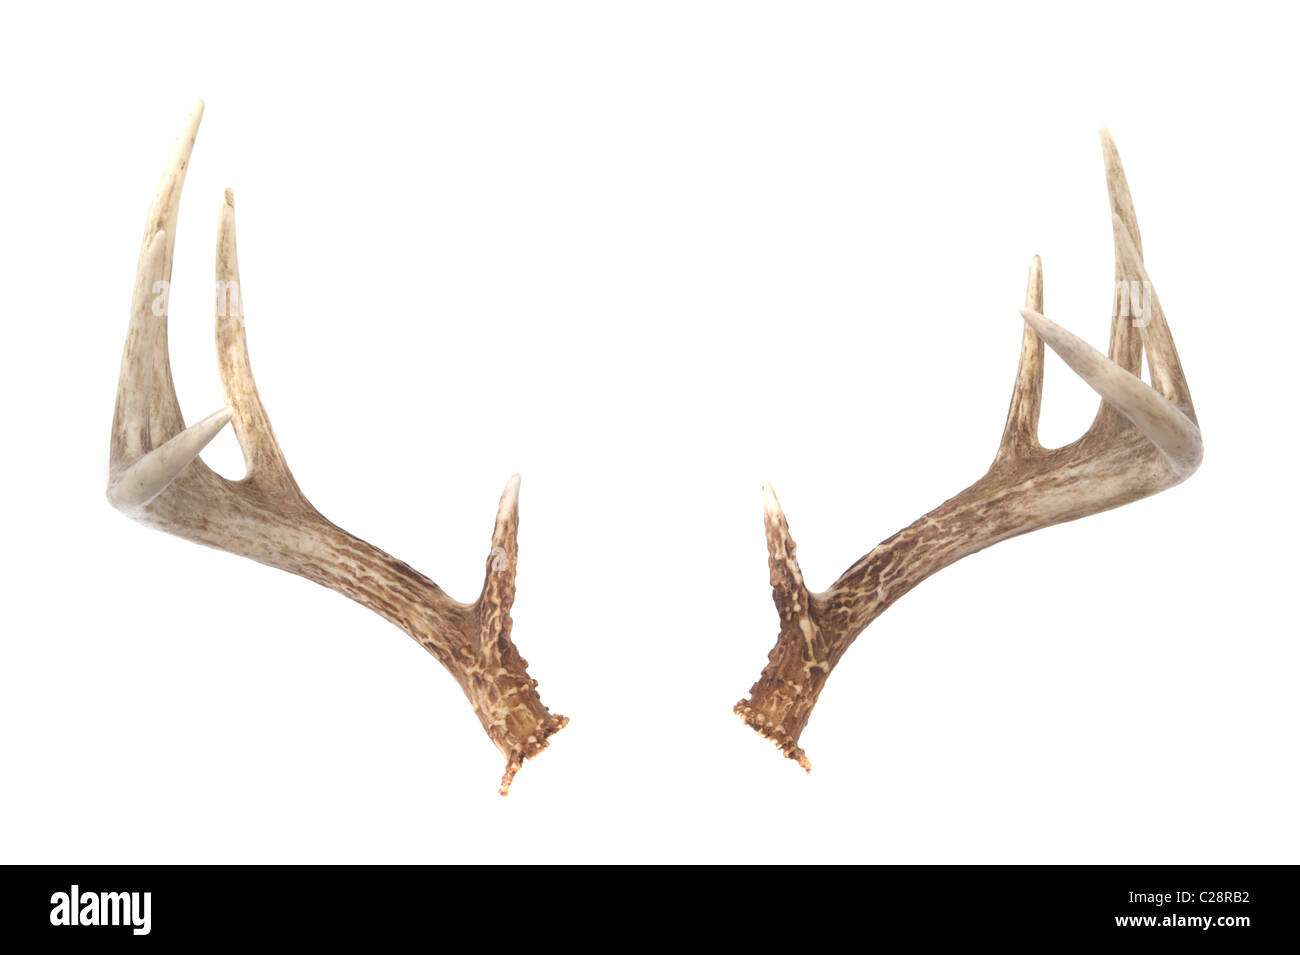 Deer Antlers Isolated on White Stock Photo